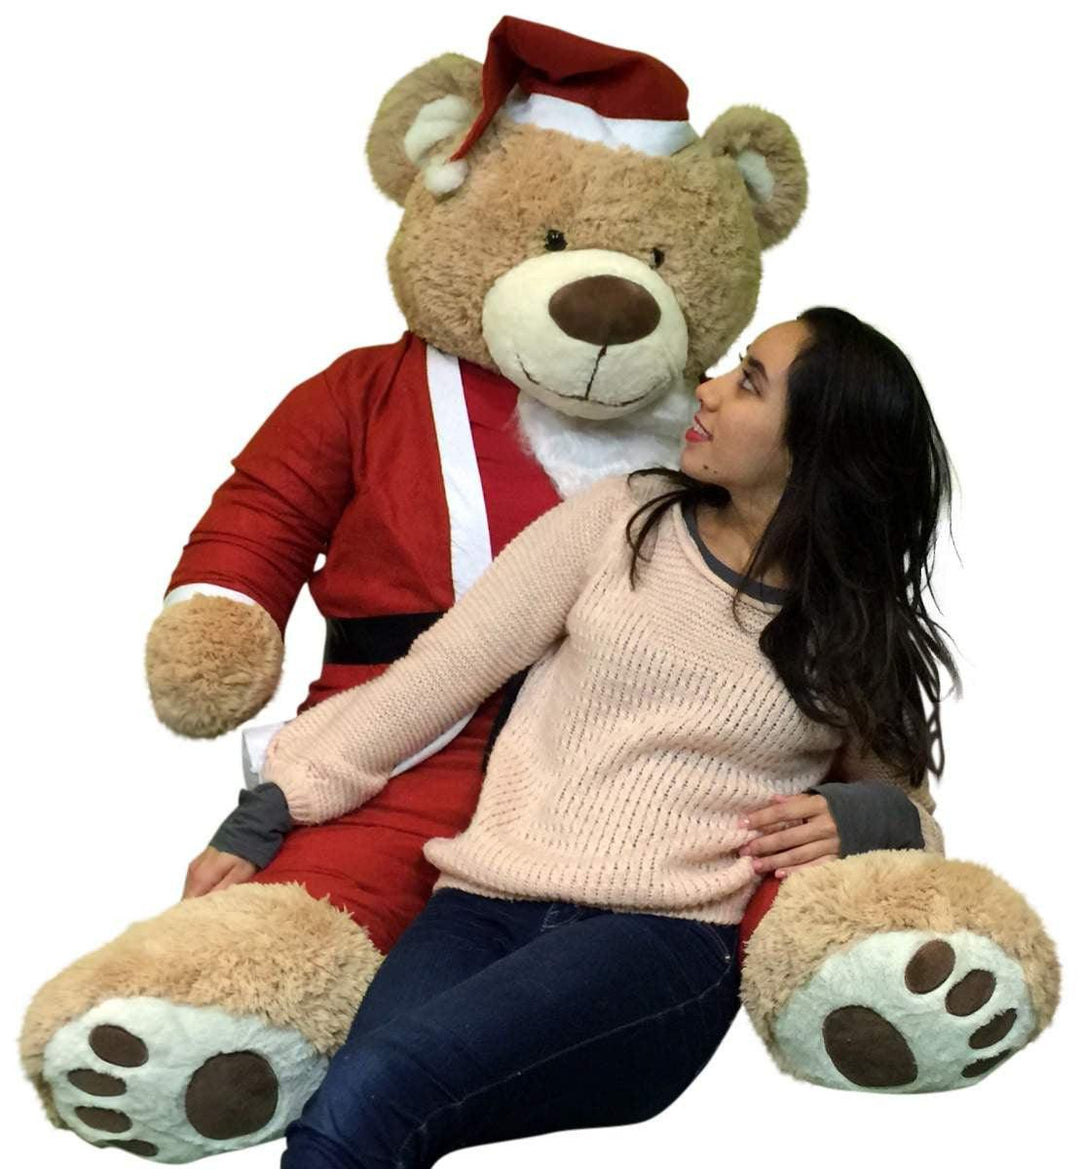 Giant Christmas Teddy Bear 60 Inch Soft, Wears Santa Claus Suit 5 Foot - Brand My Case